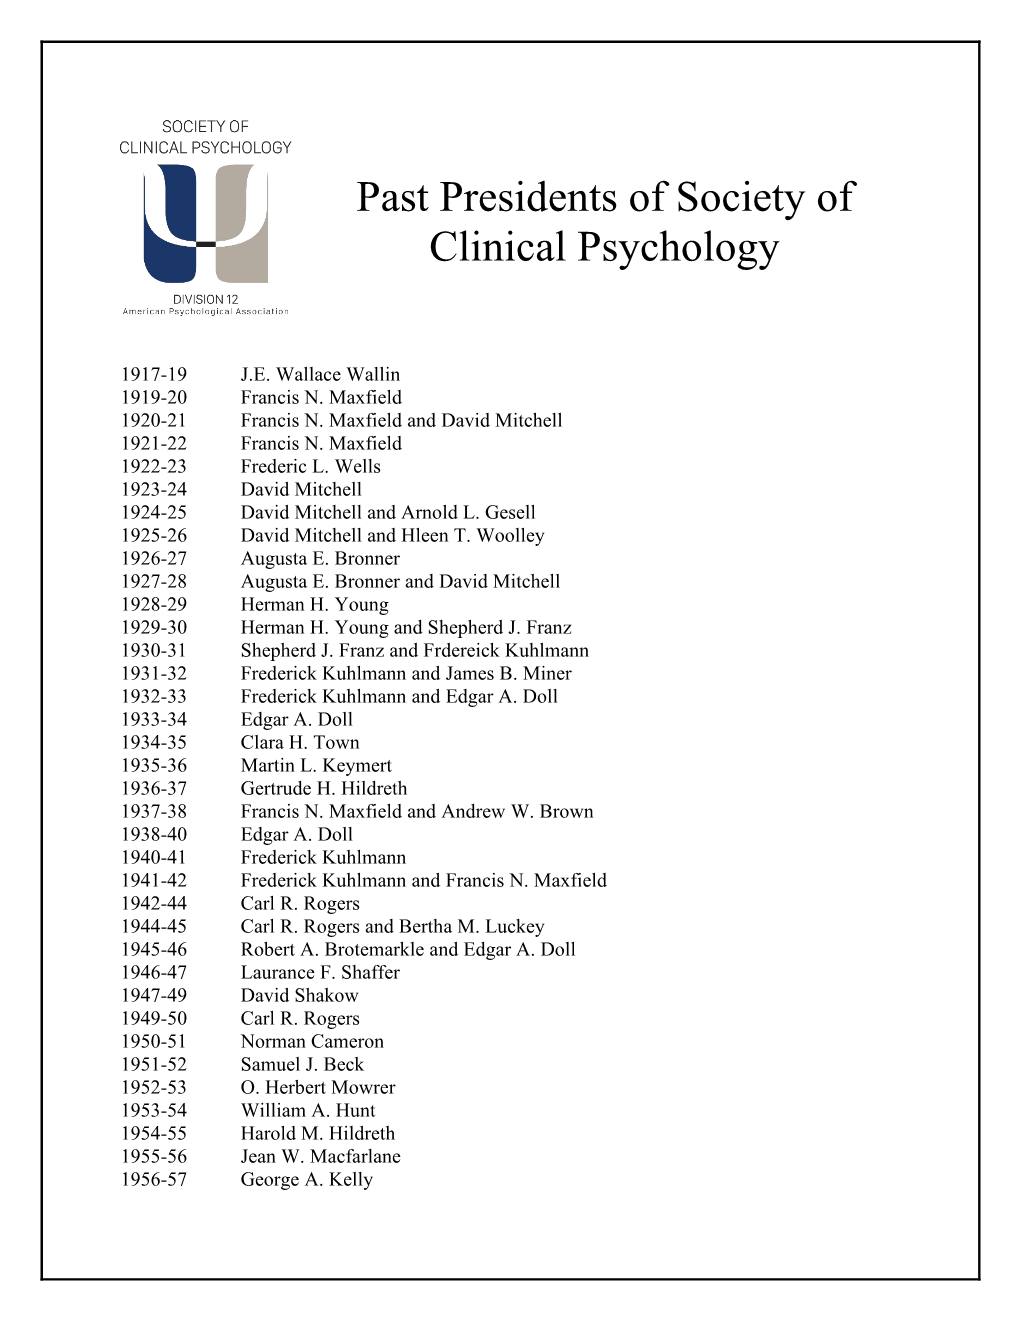 Past Presidents of Society of Clinical Psychology